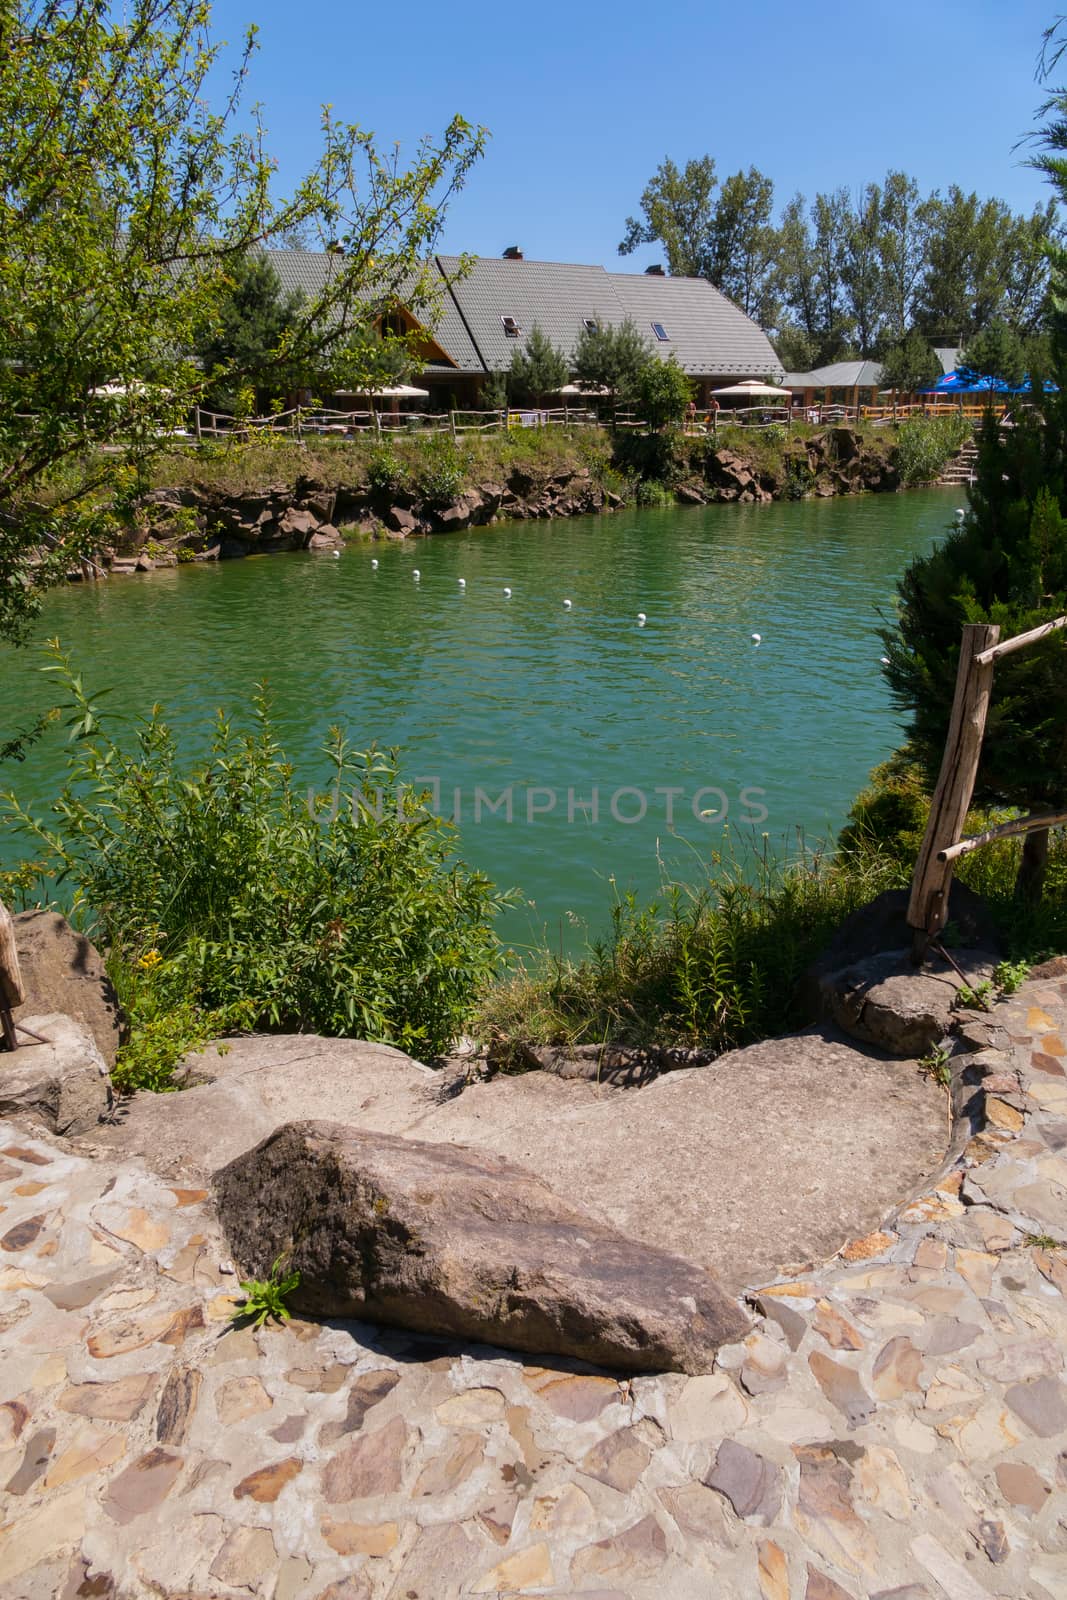 Desert man-made pond in the park for a rest in the midday heat by Adamchuk